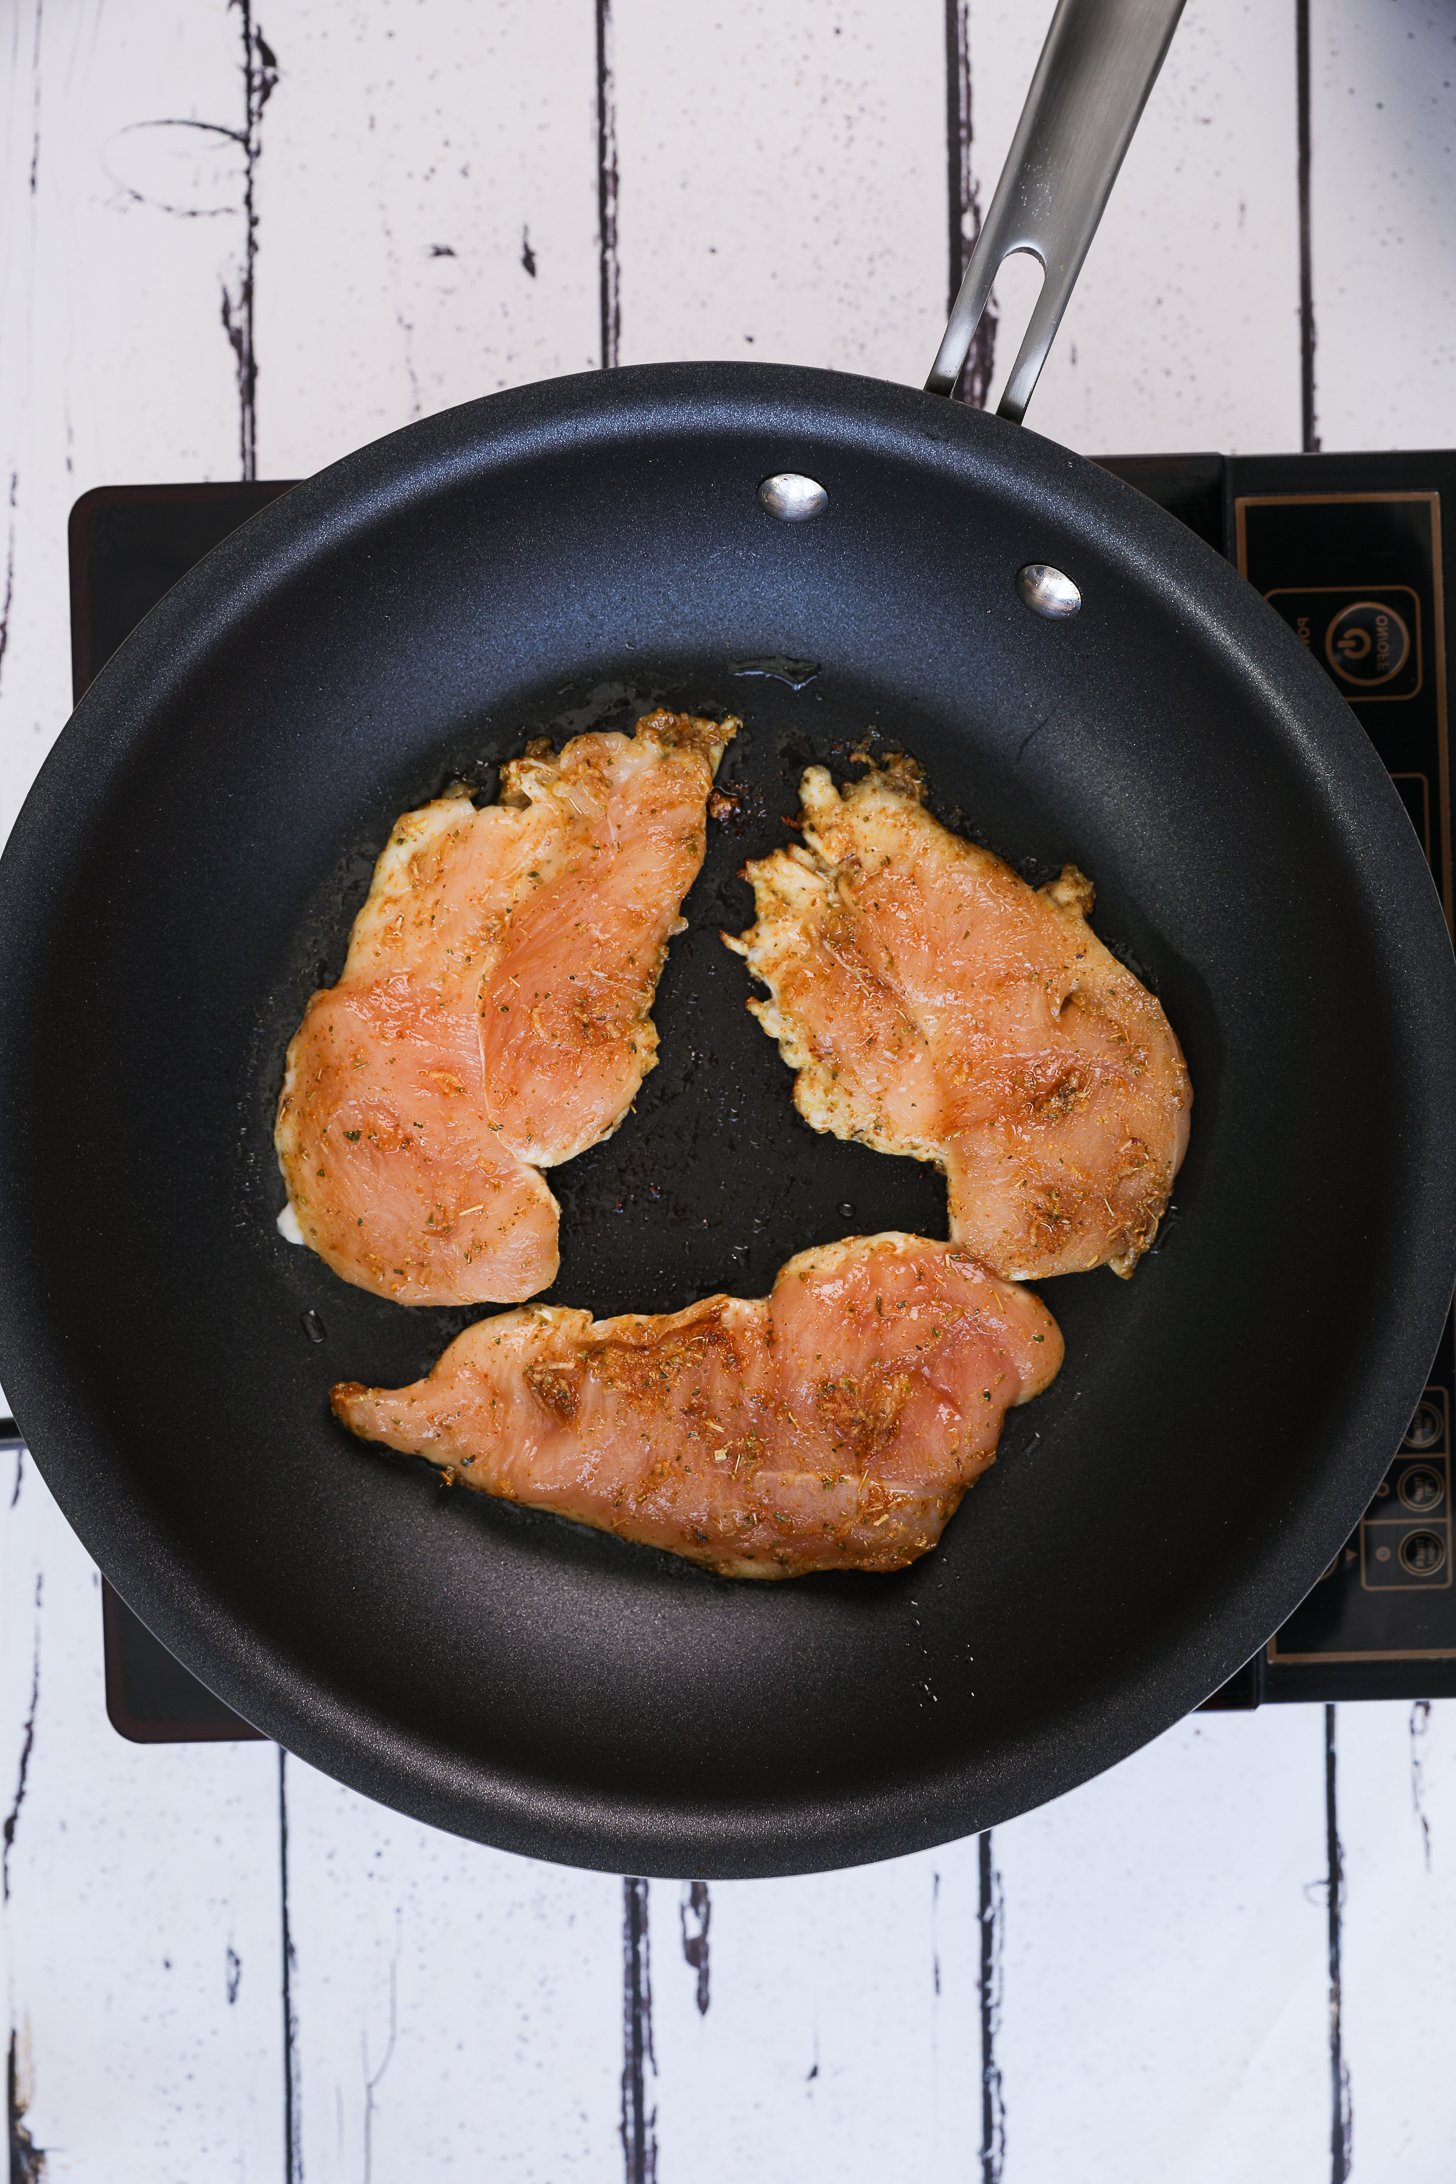 Spice-coated chicken slices frying in a pan on a mobile cooktop.